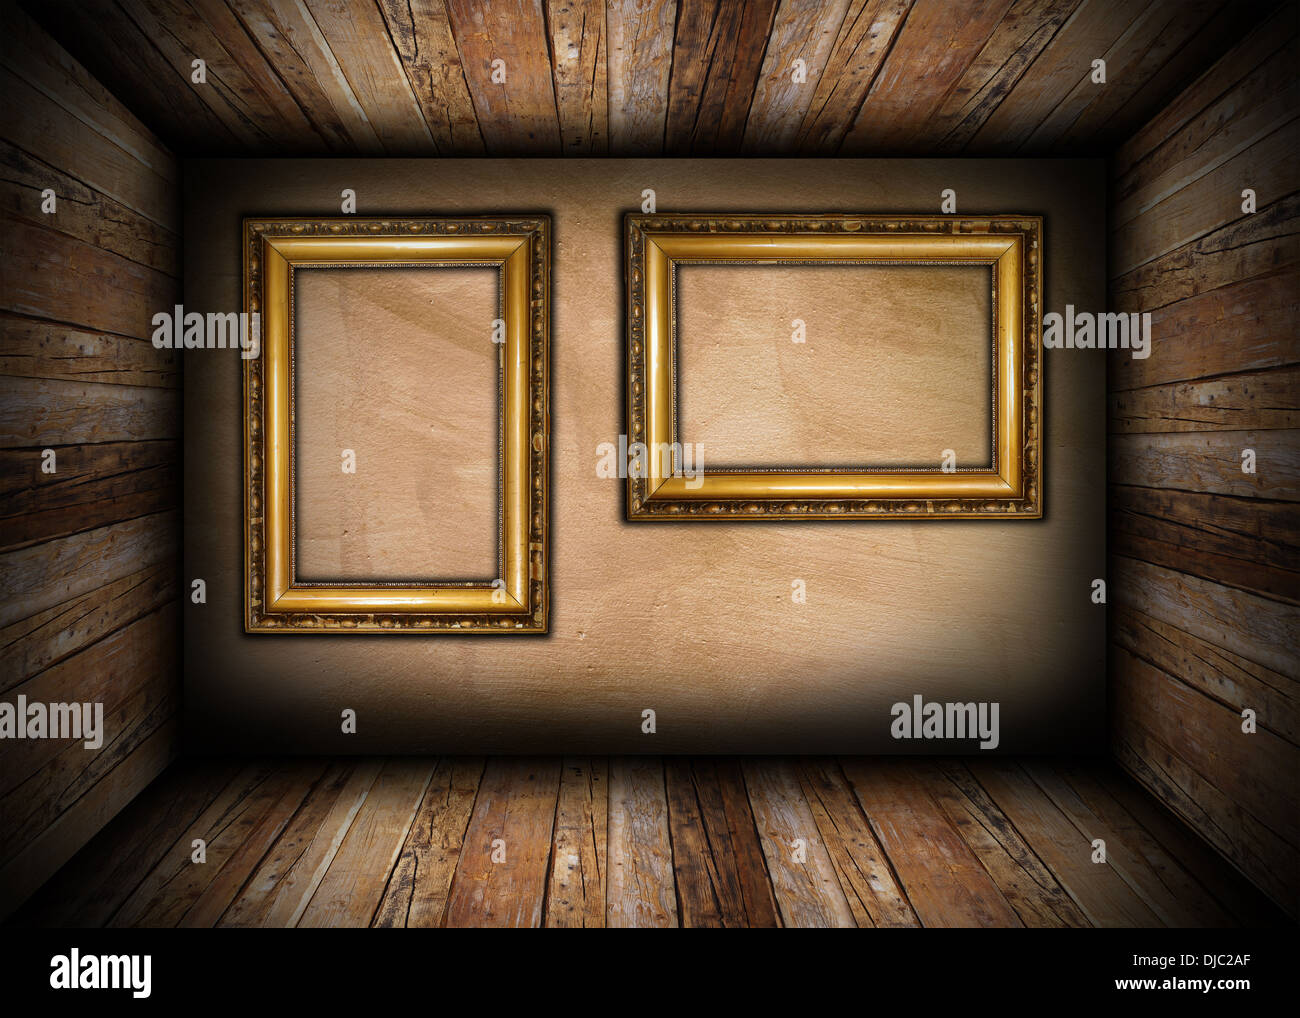 two old frames on interior wall Stock Photo